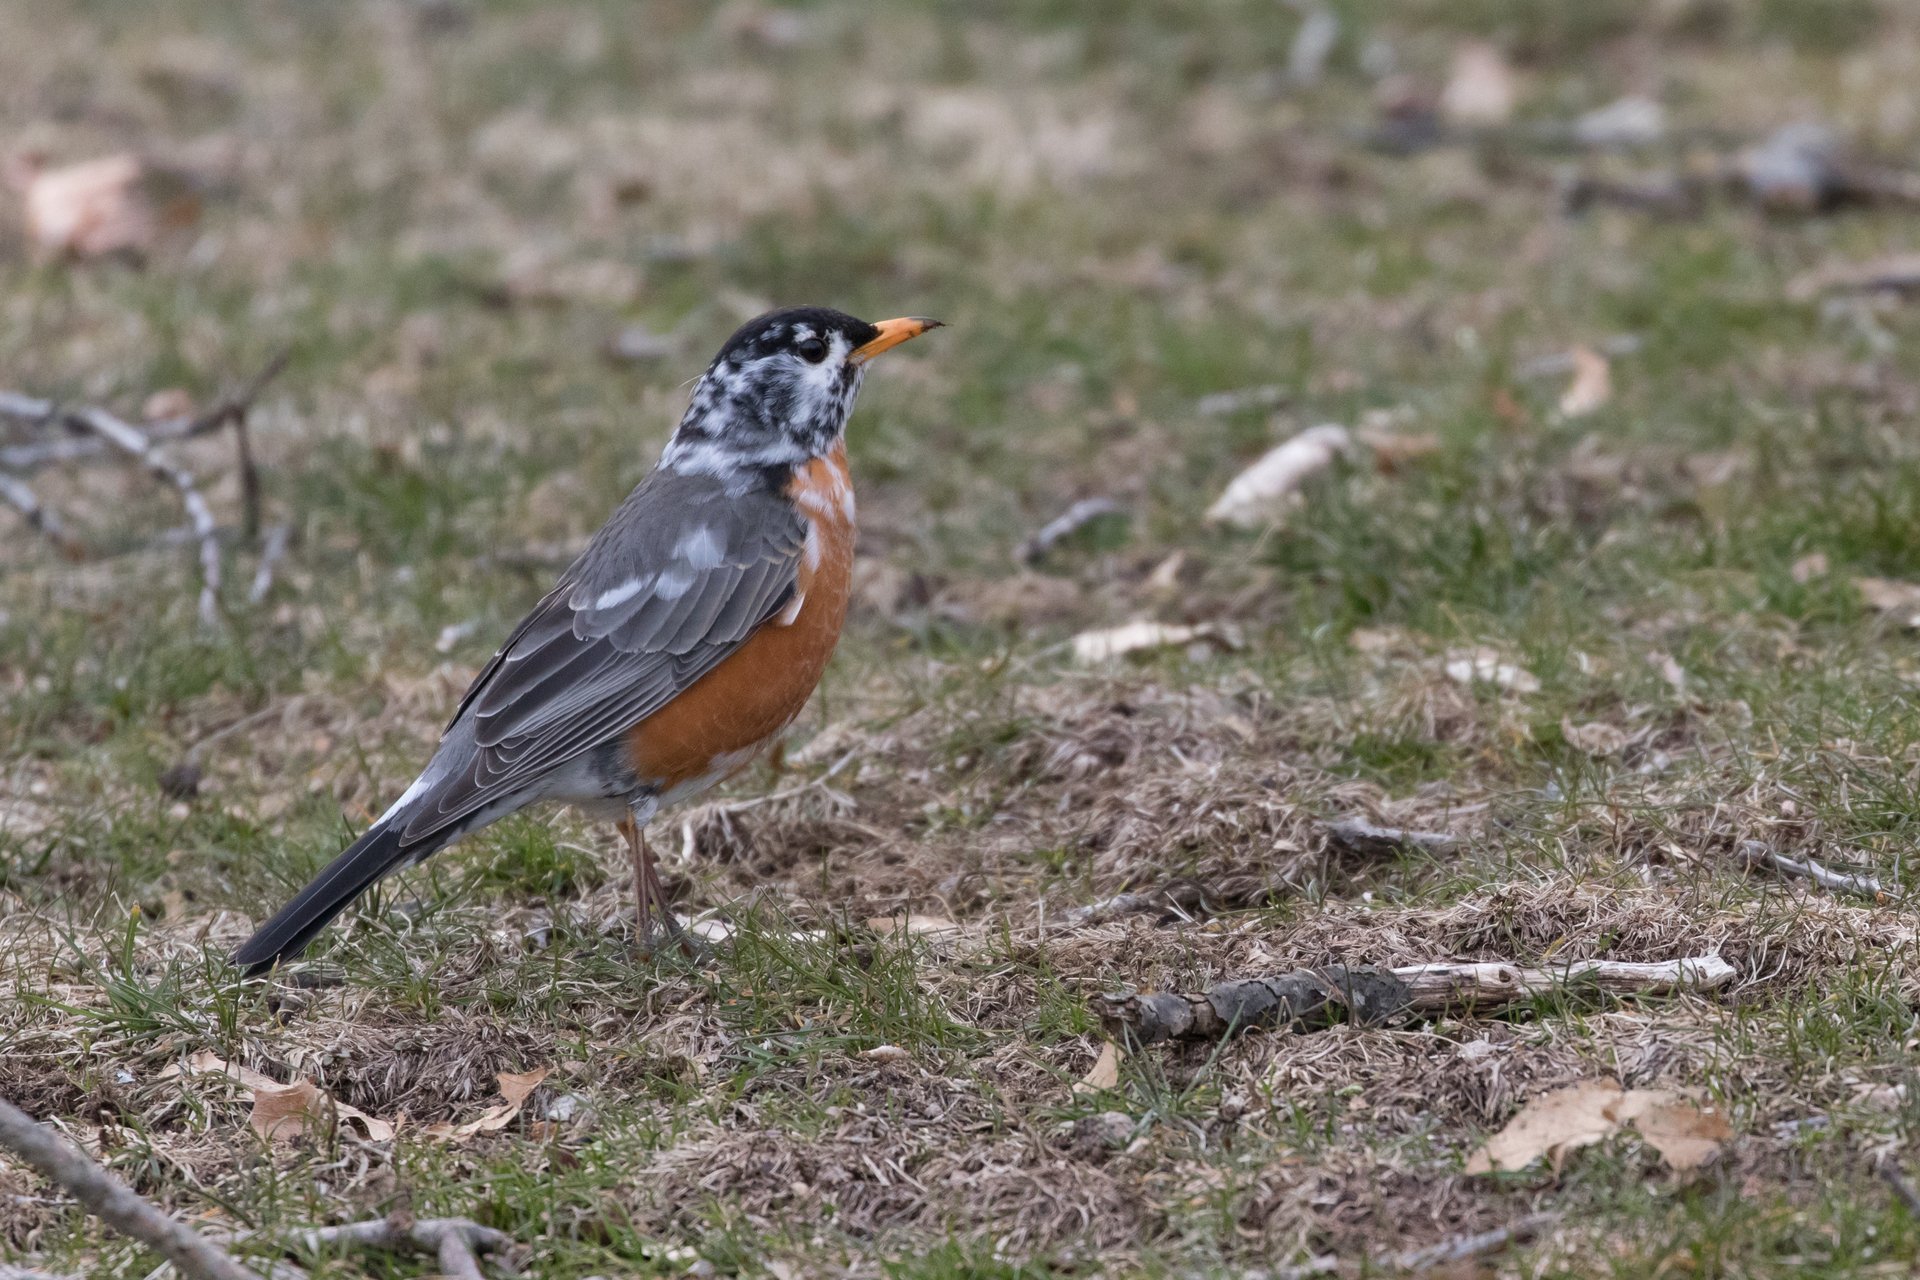 American Robin with Leucism, marked by white patches on it's head